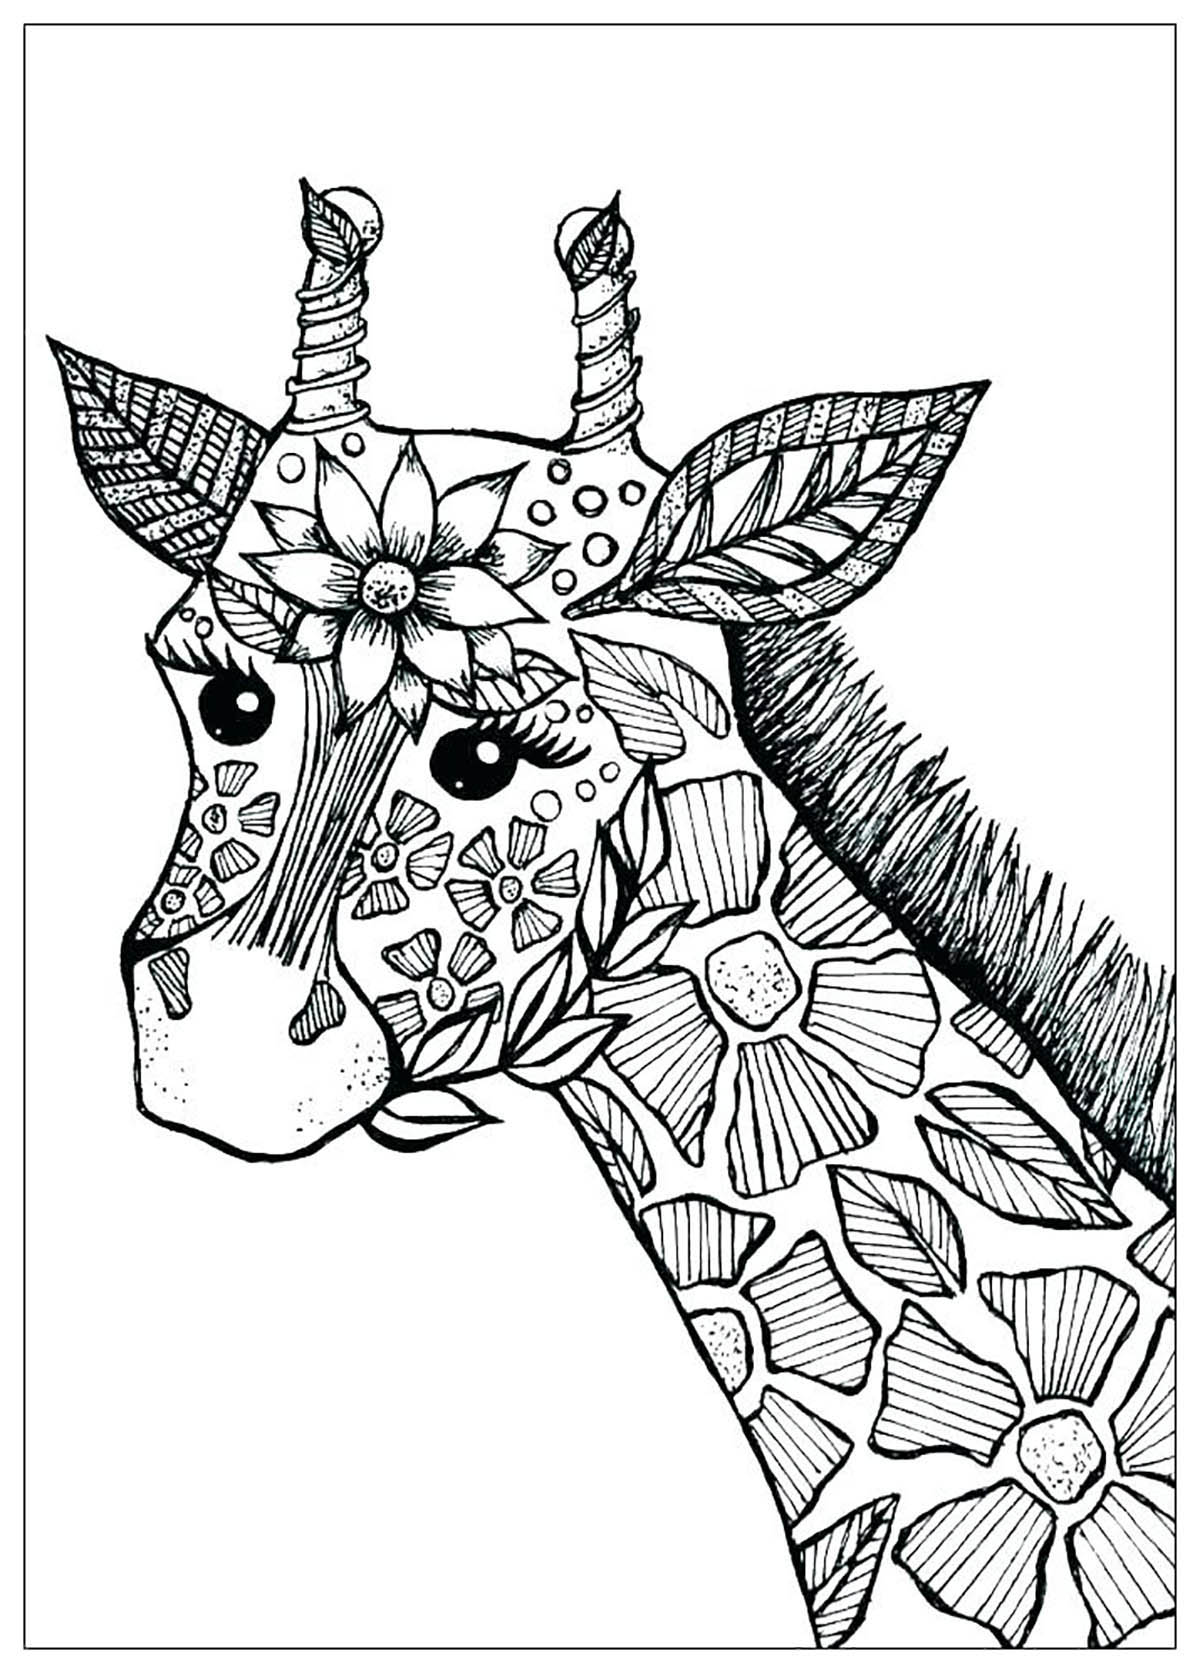 Giraffes coloring page with few details for kids